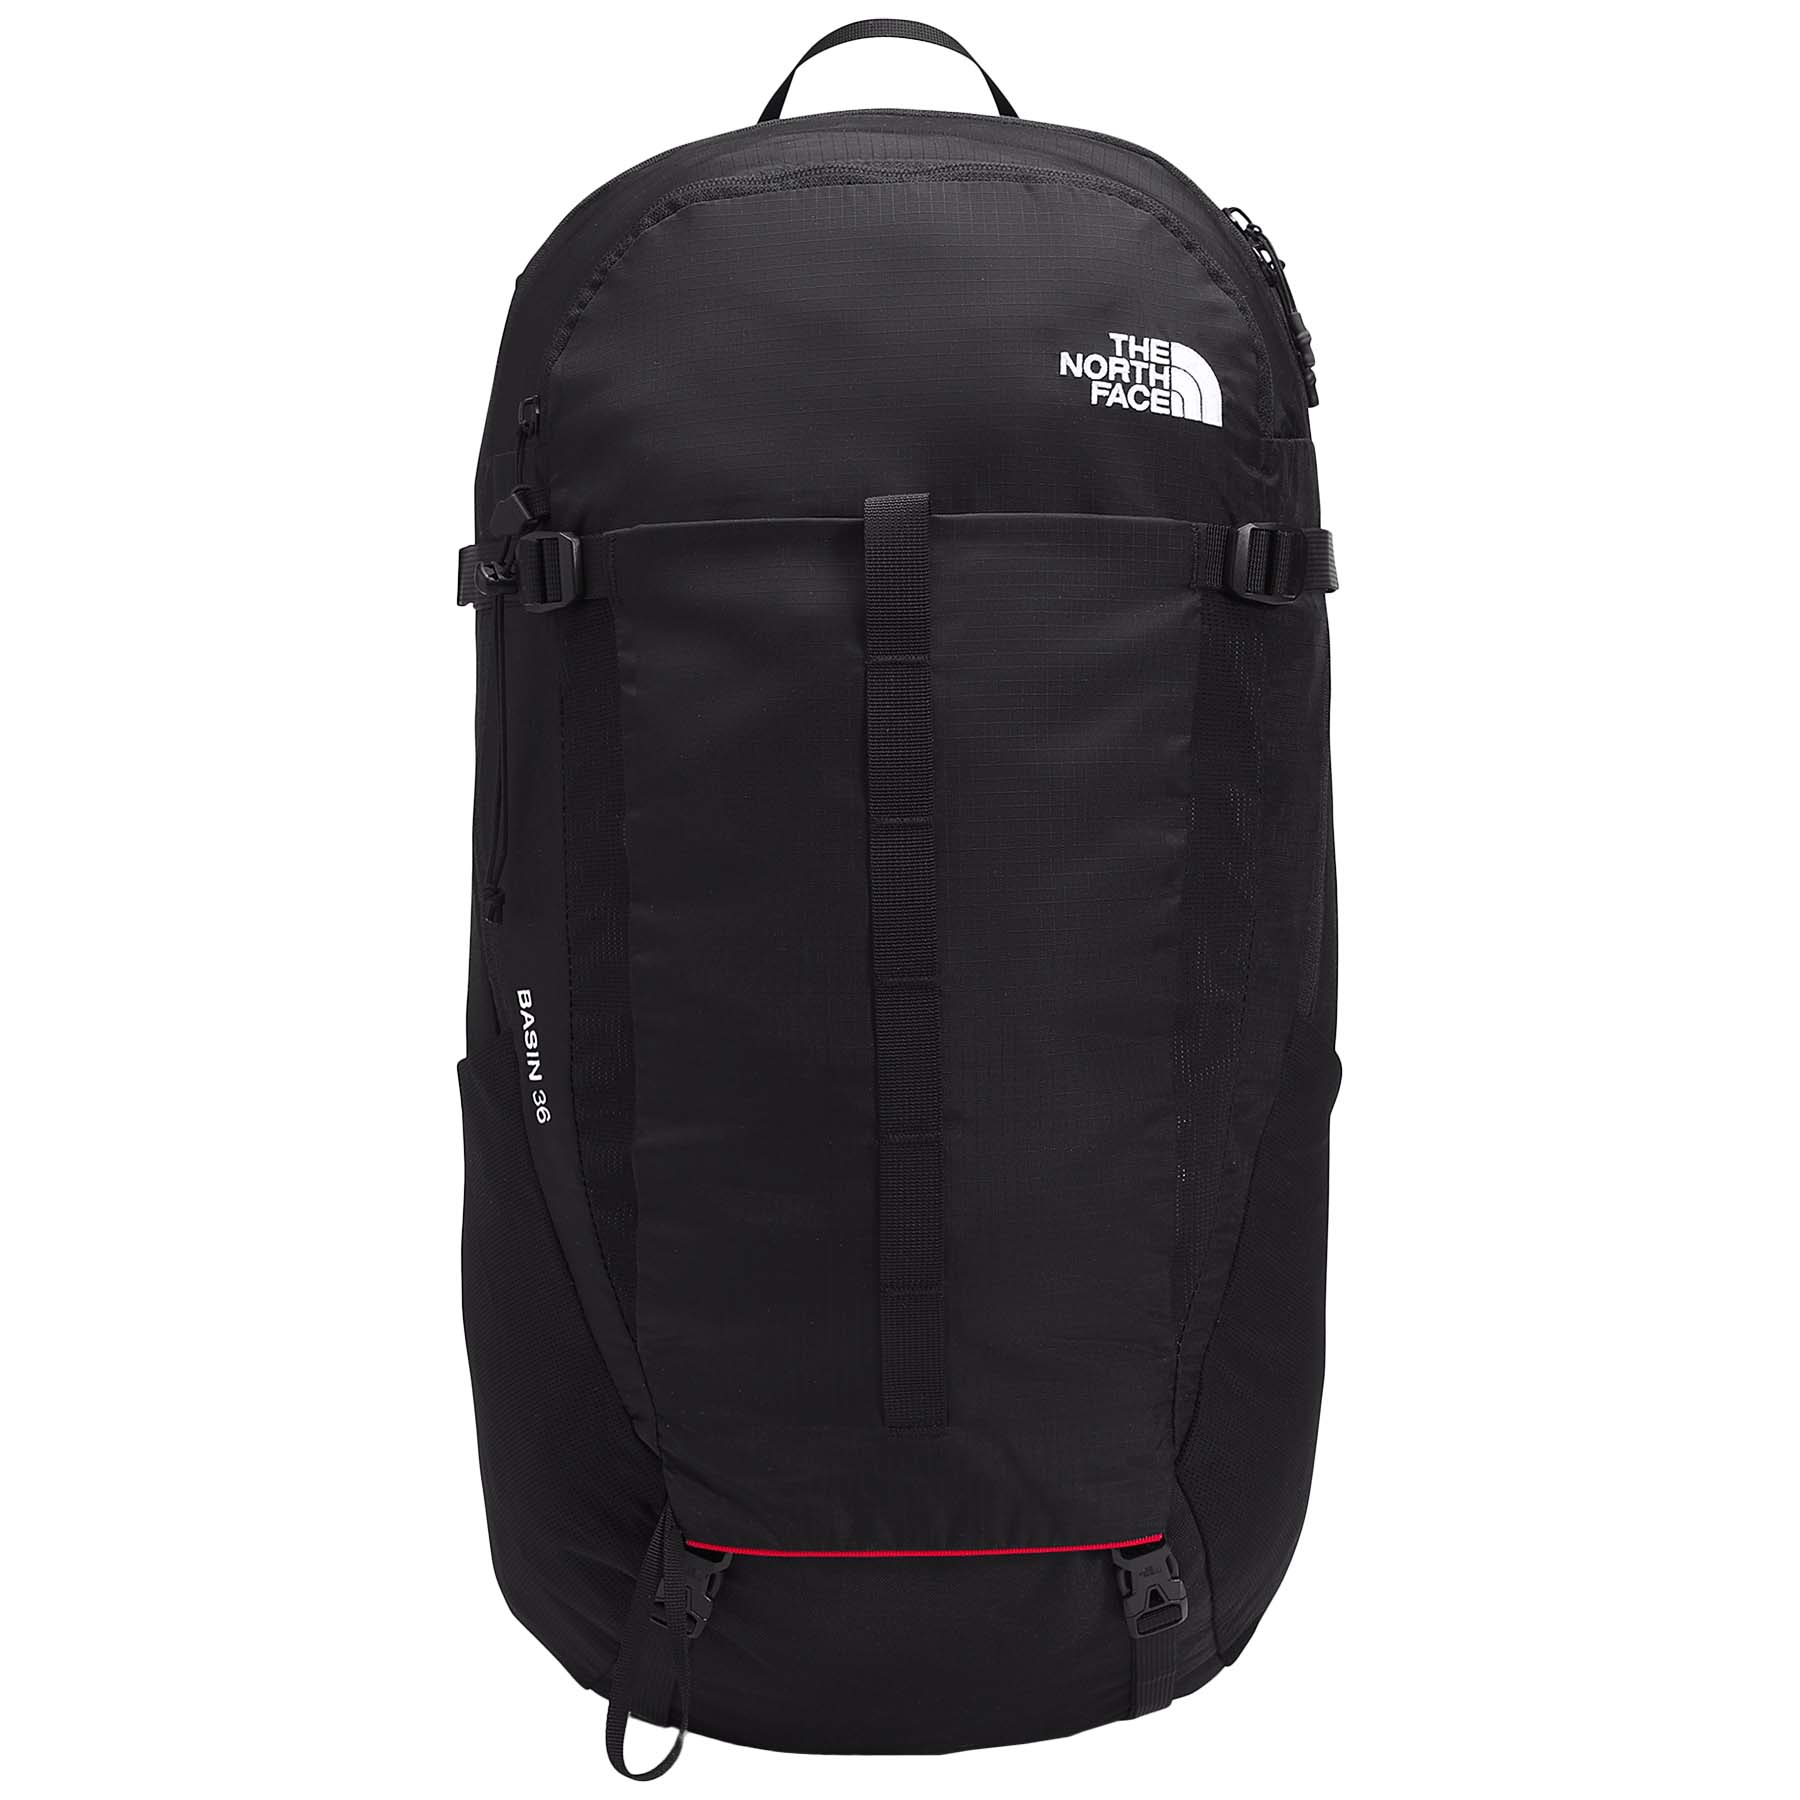 The North Face Basin 36 Hiking Backpack